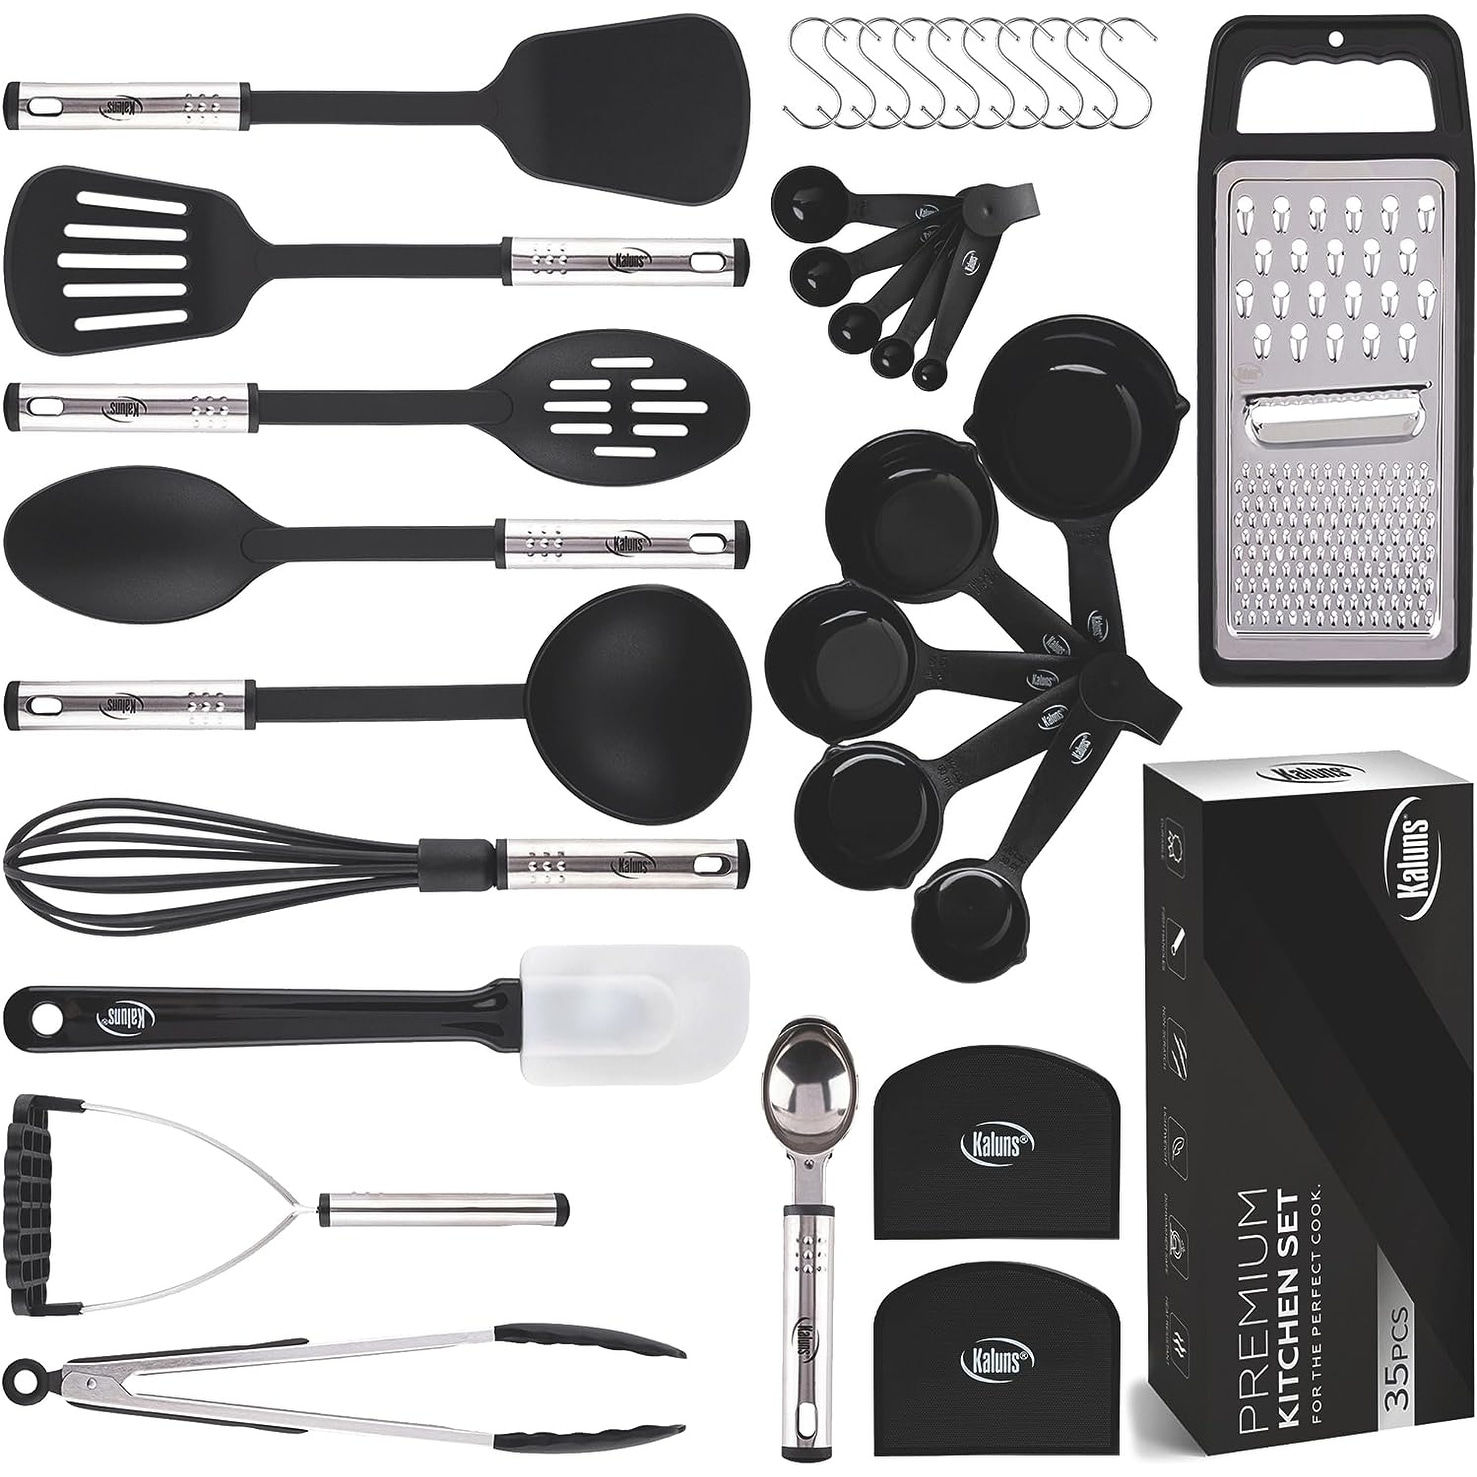 https://ak1.ostkcdn.com/images/products/is/images/direct/33c42b58899541f292367ad755840a11c2f81081/Kaluns-Kitchen-Utensil-sets.-Cooking---Baking-Supplies---Non-Stick-and-Heat-Resistant-Cookware-set---3-Sizes.jpg